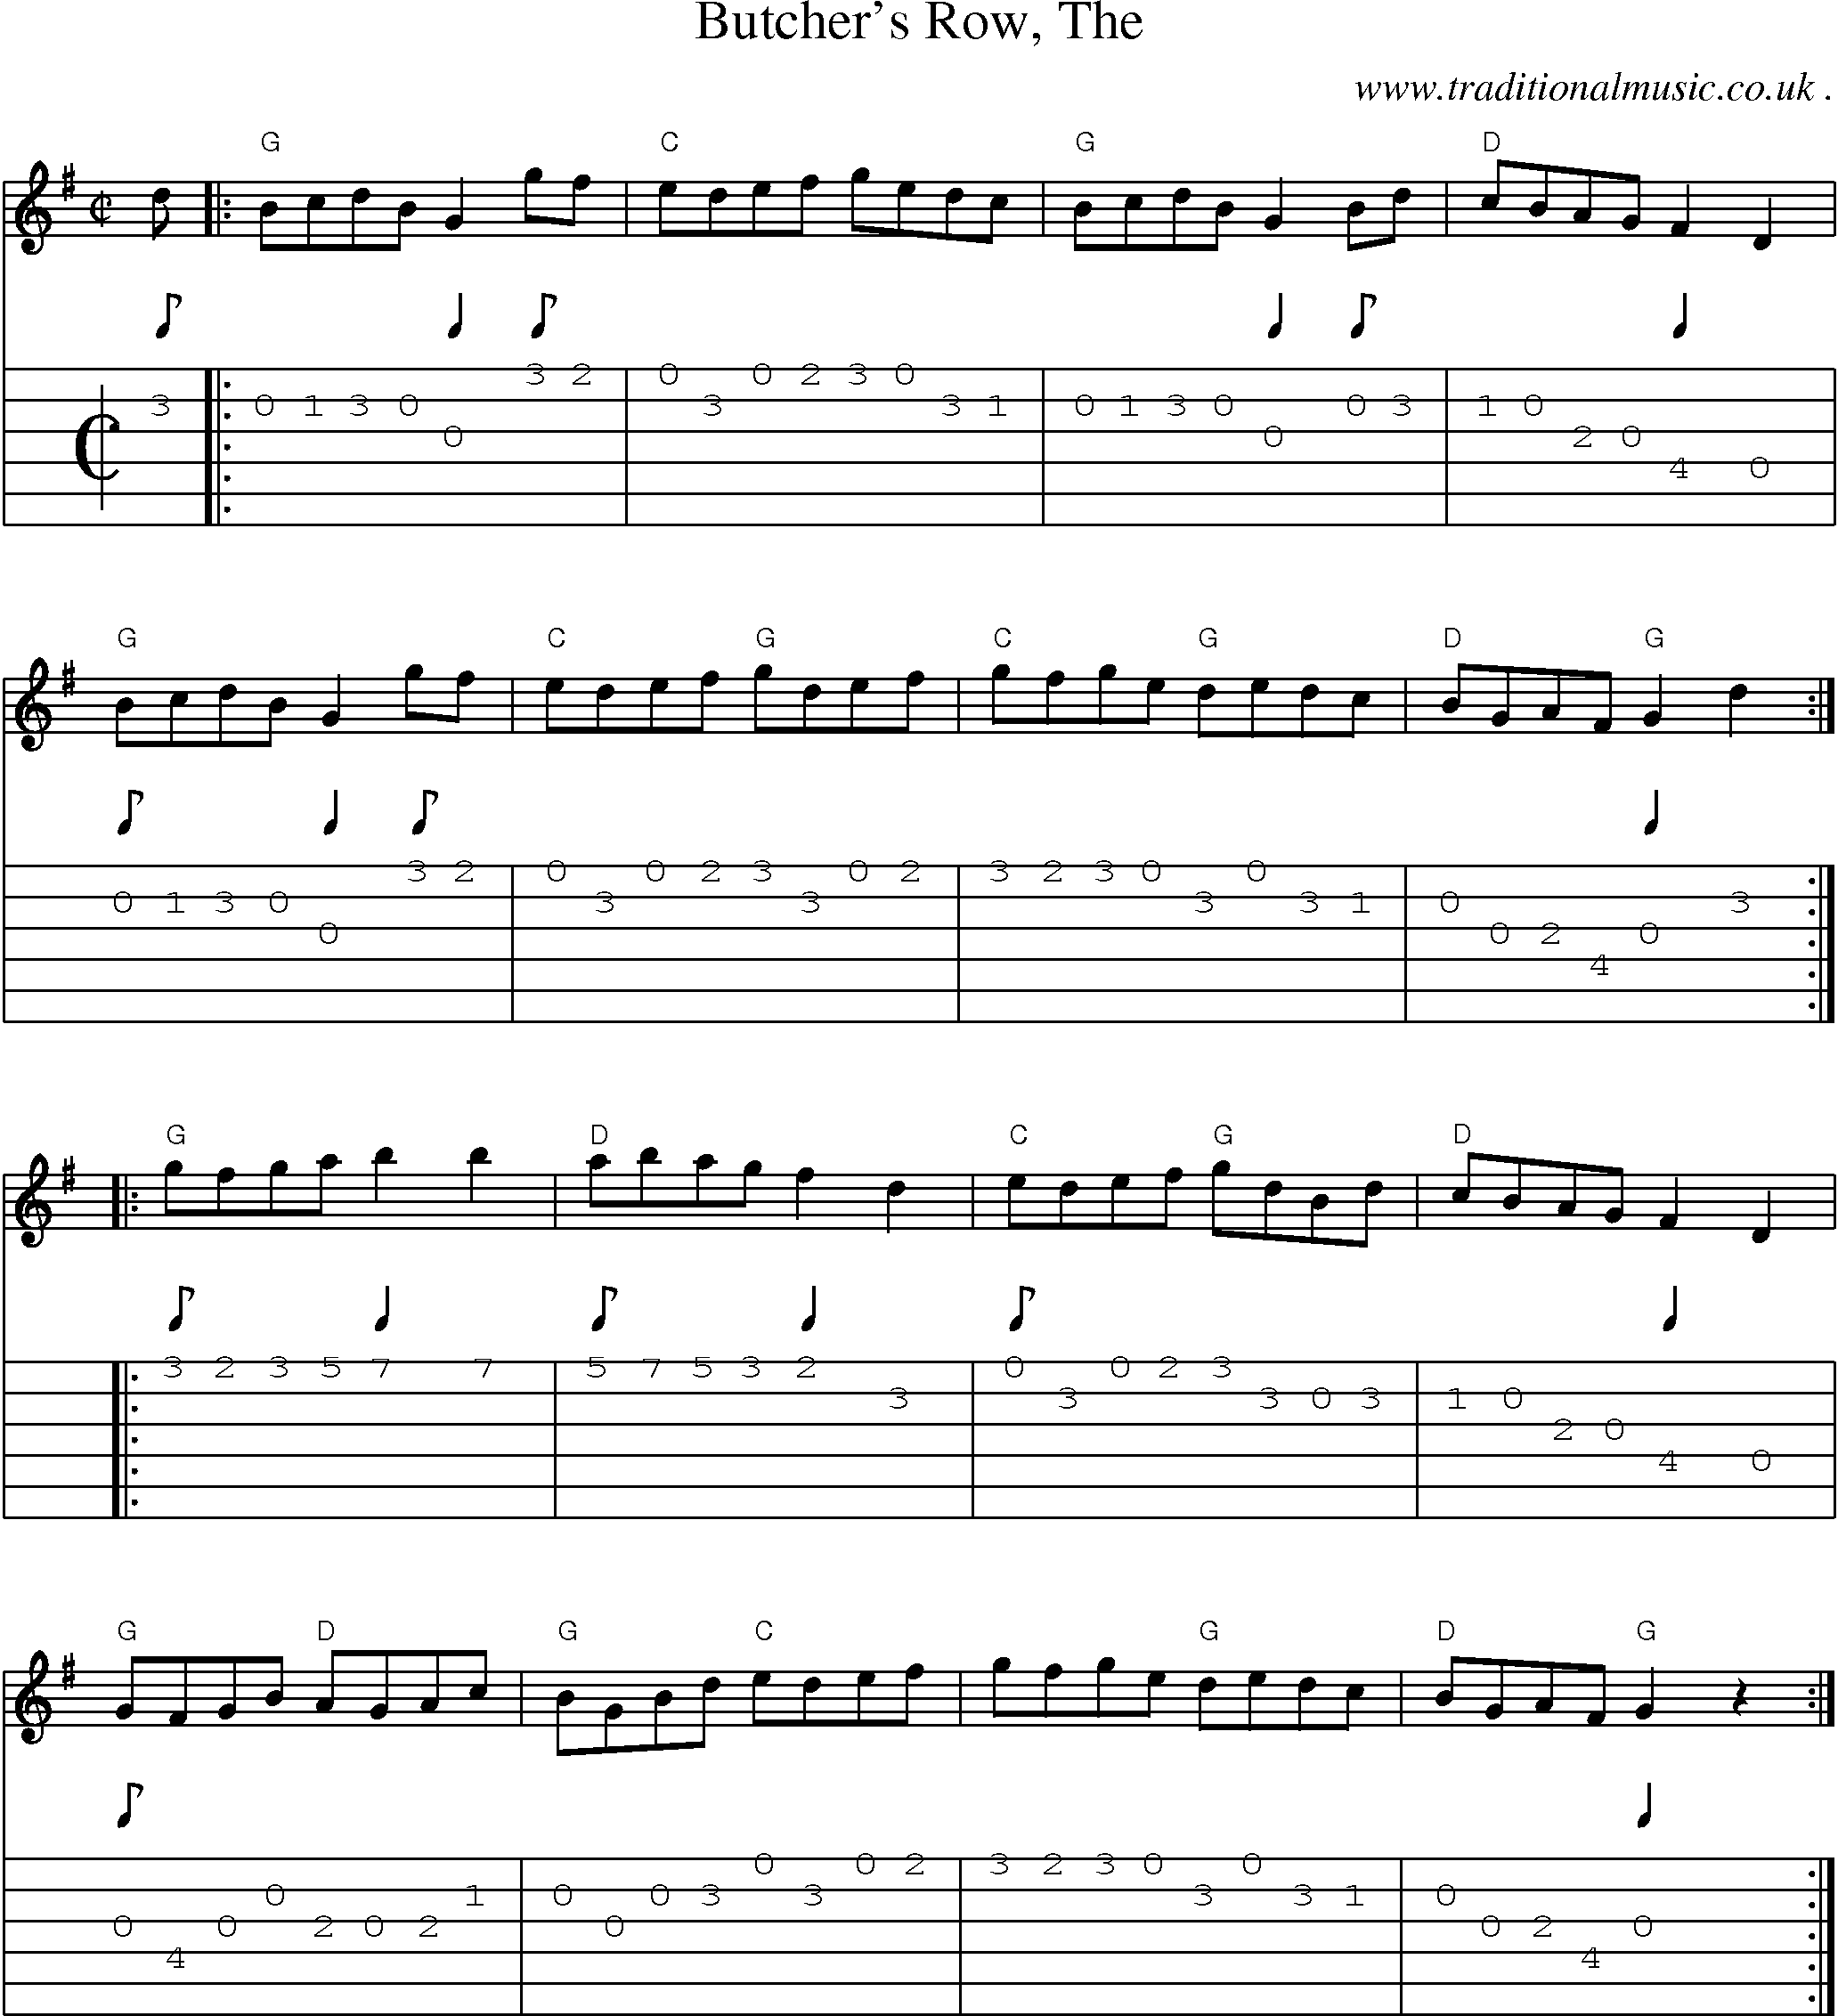 Music Score and Guitar Tabs for Butchers Row The